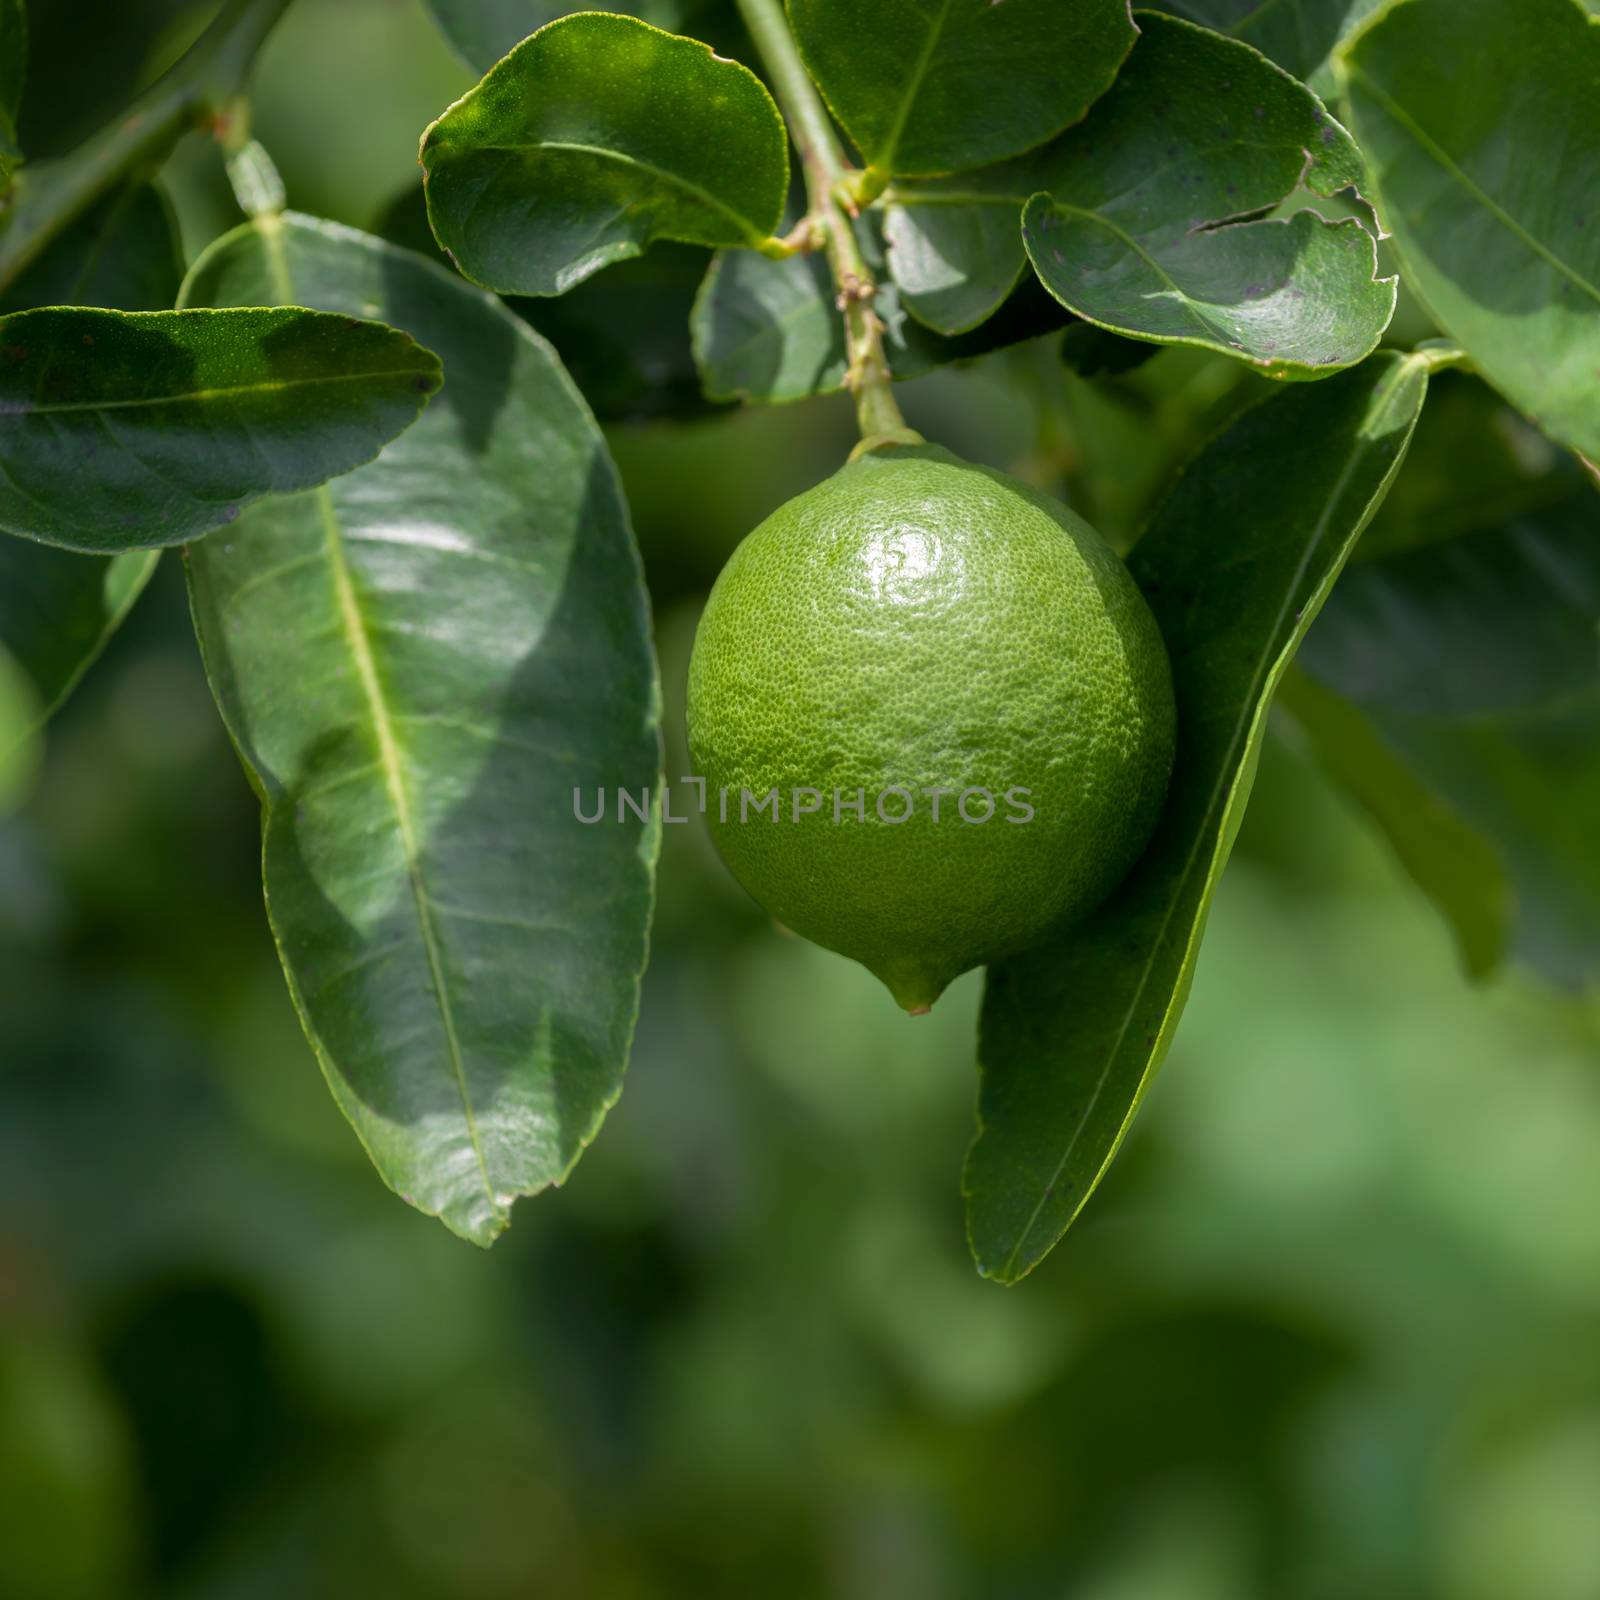 Lime tree and fresh green limes on the branch in the lime garden by kerdkanno